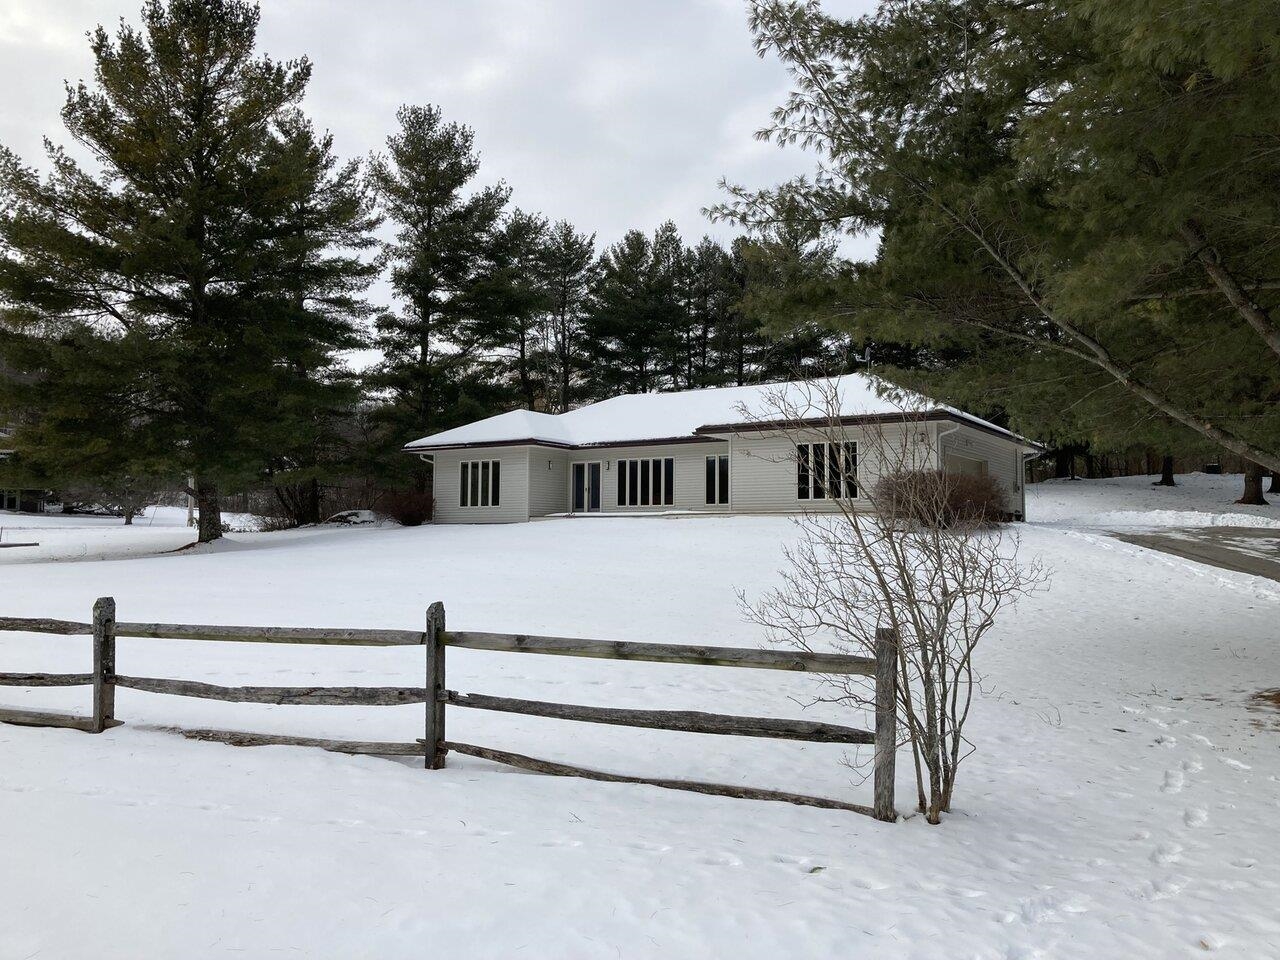 Sold property in Middlebury